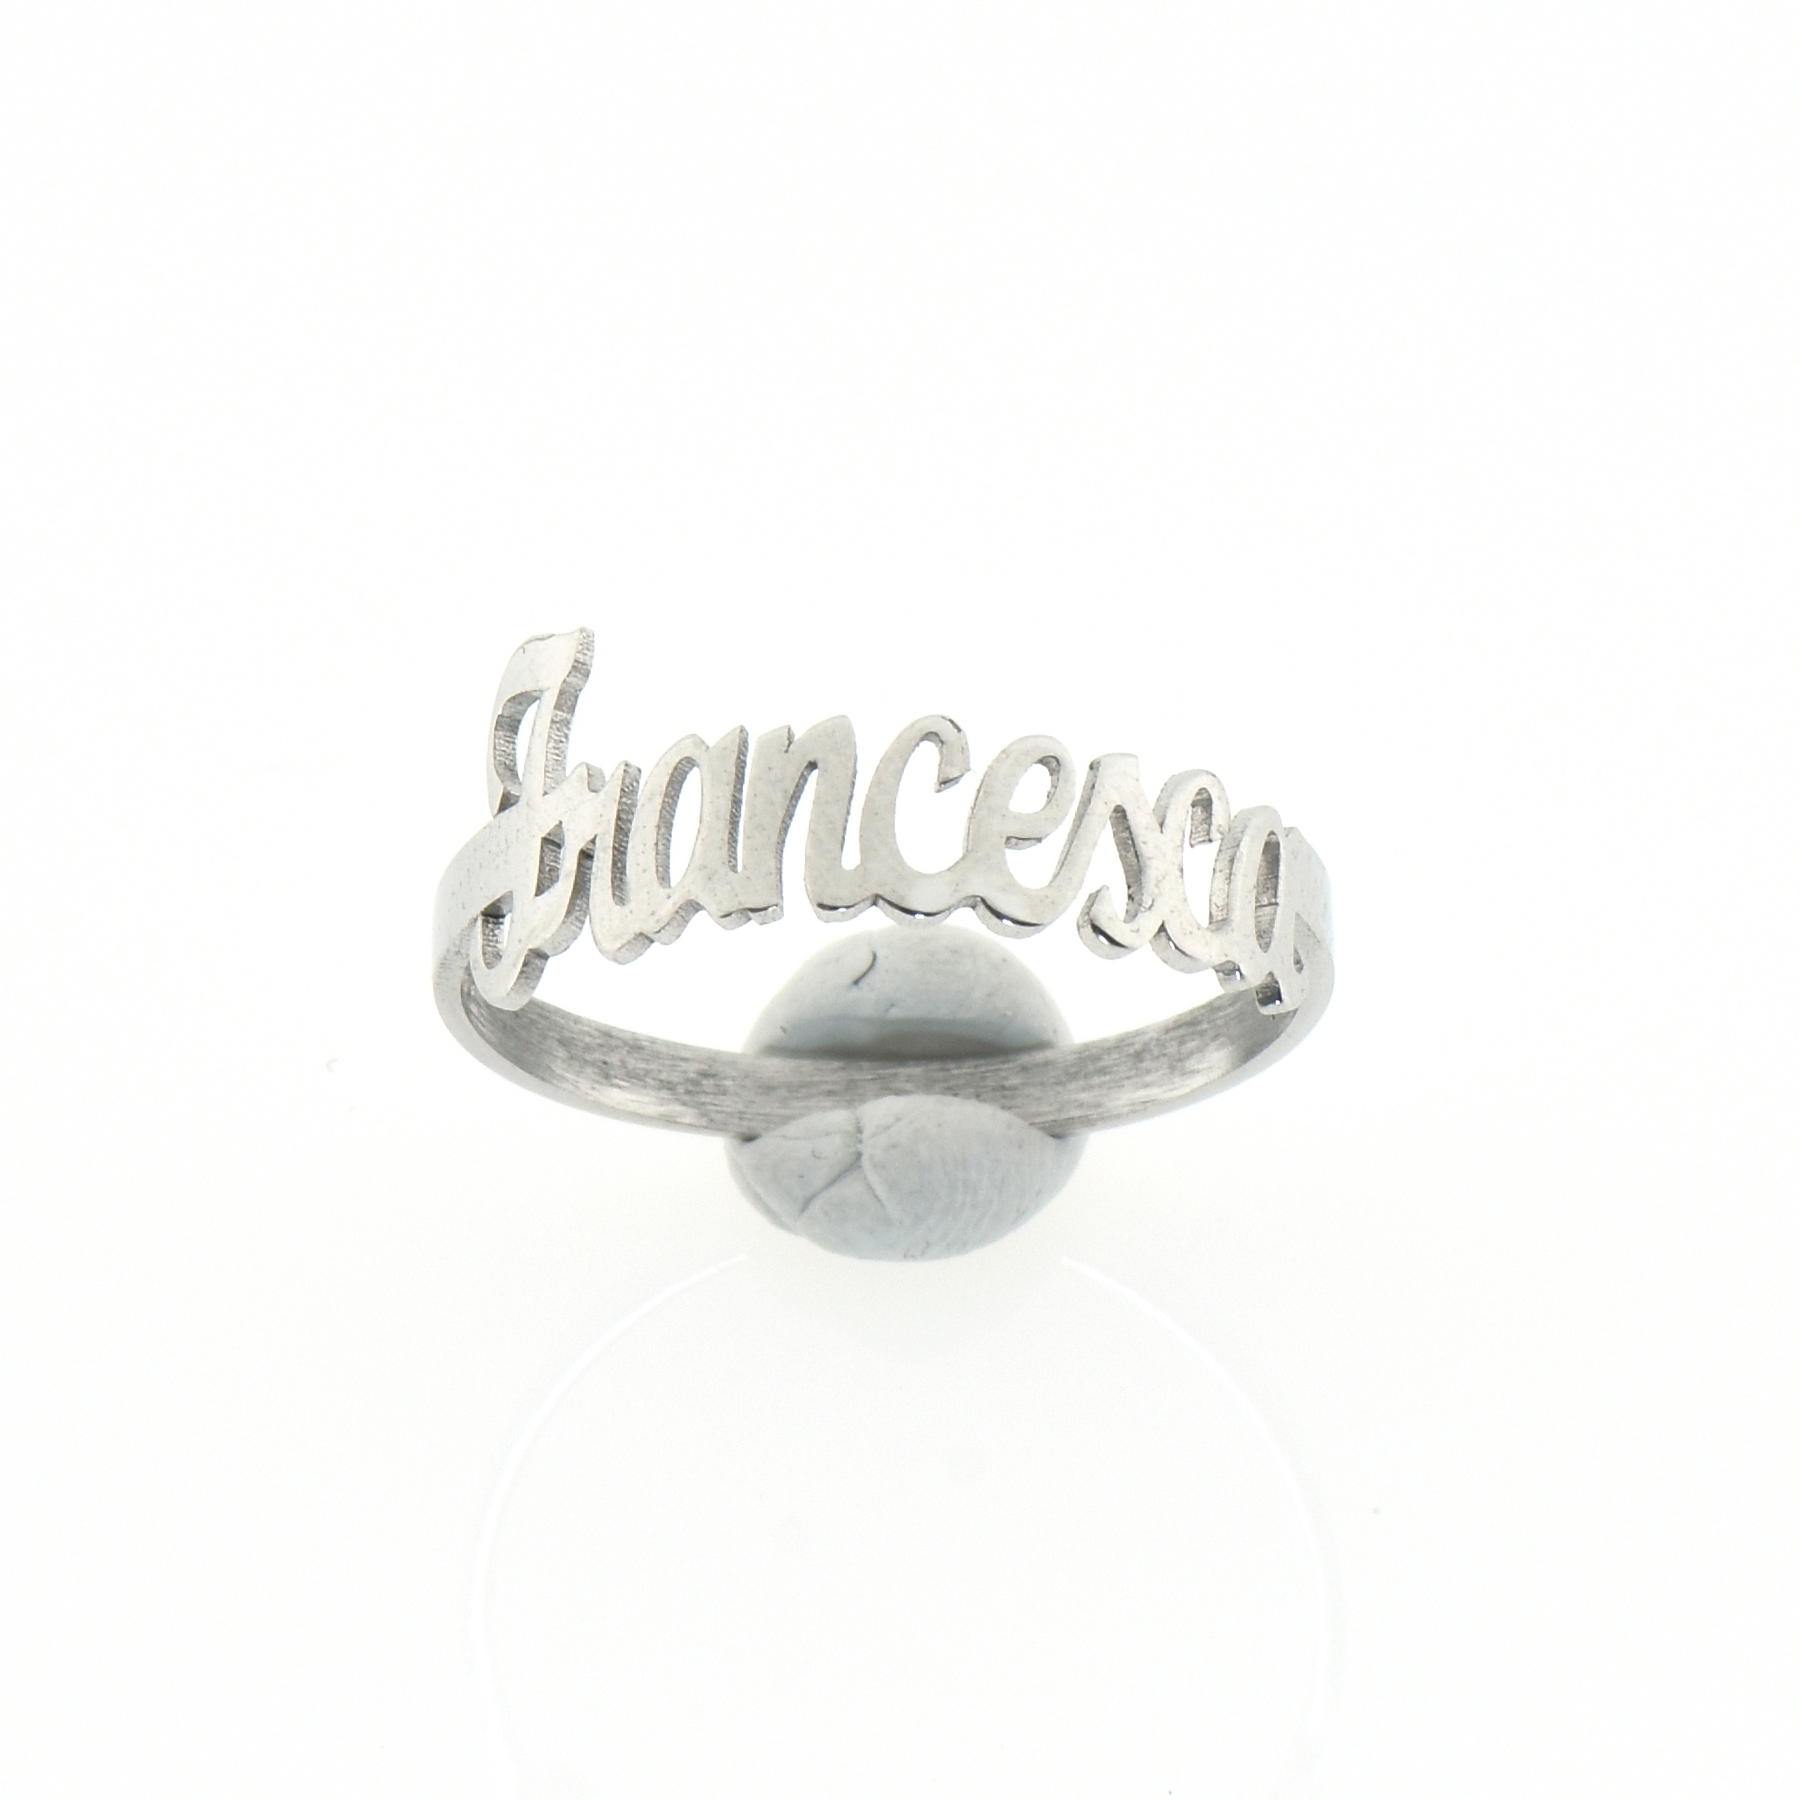 Very Name 925% Silver Italic French Ring